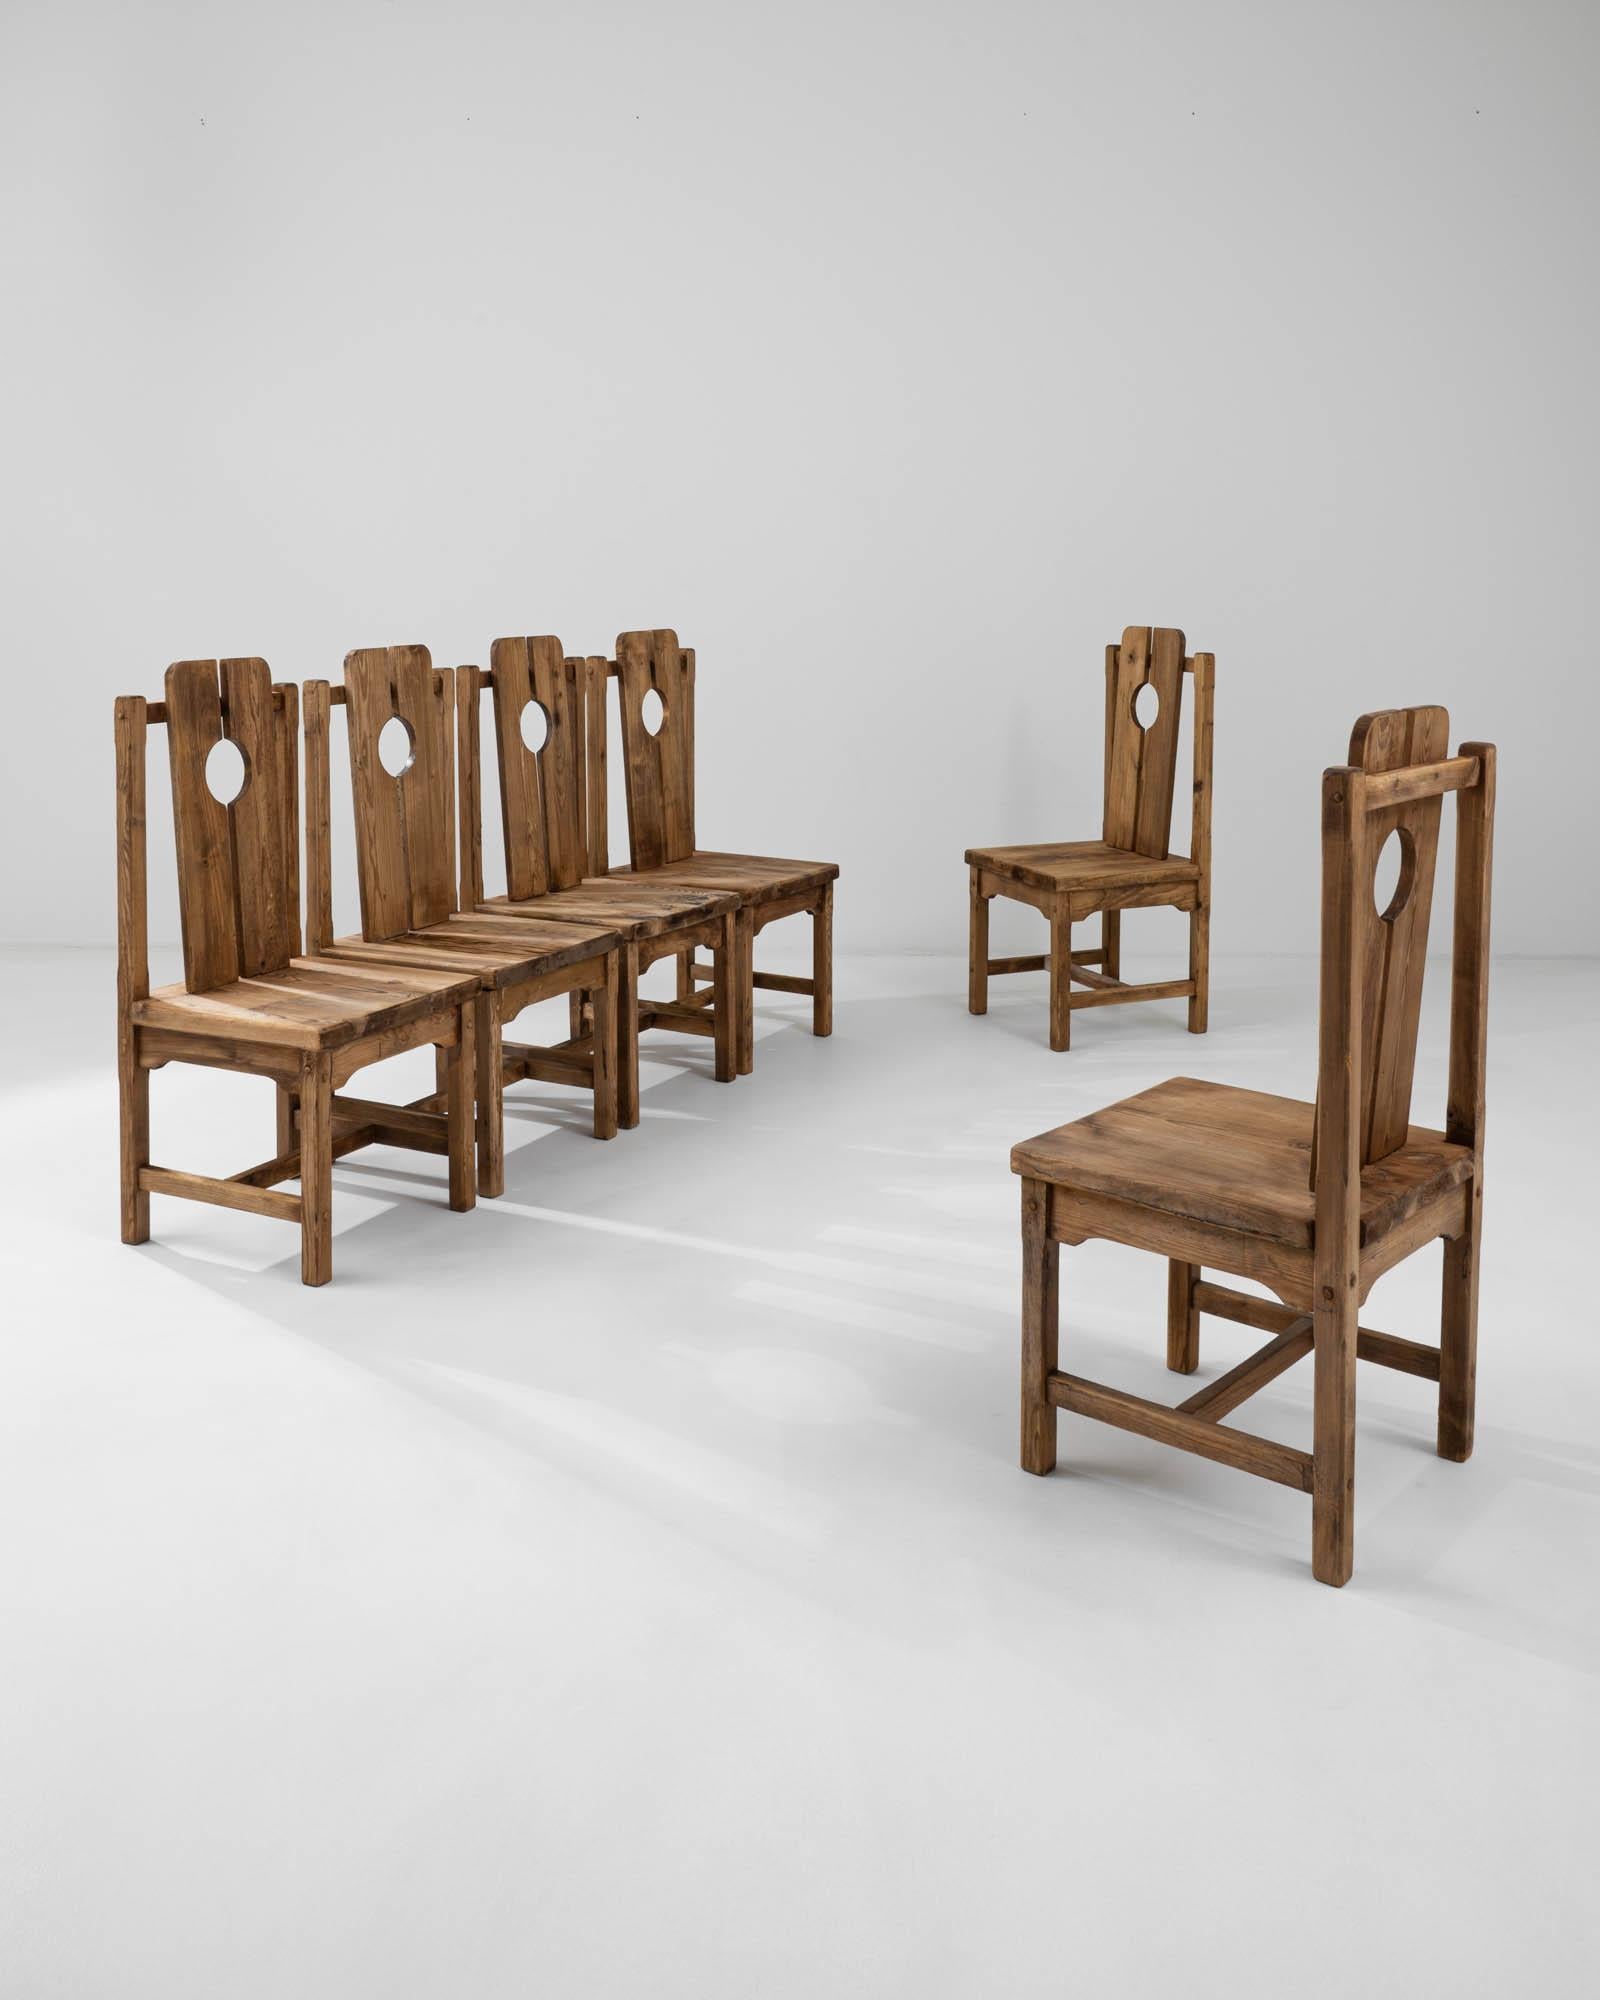 The unique design of this set of six dining chairs combines Provincial simplicity with the graphic tendencies of early Modernism. Hand-crafted in France in the early 20th century, peg joints and farmhouse-style struts celebrate traditional